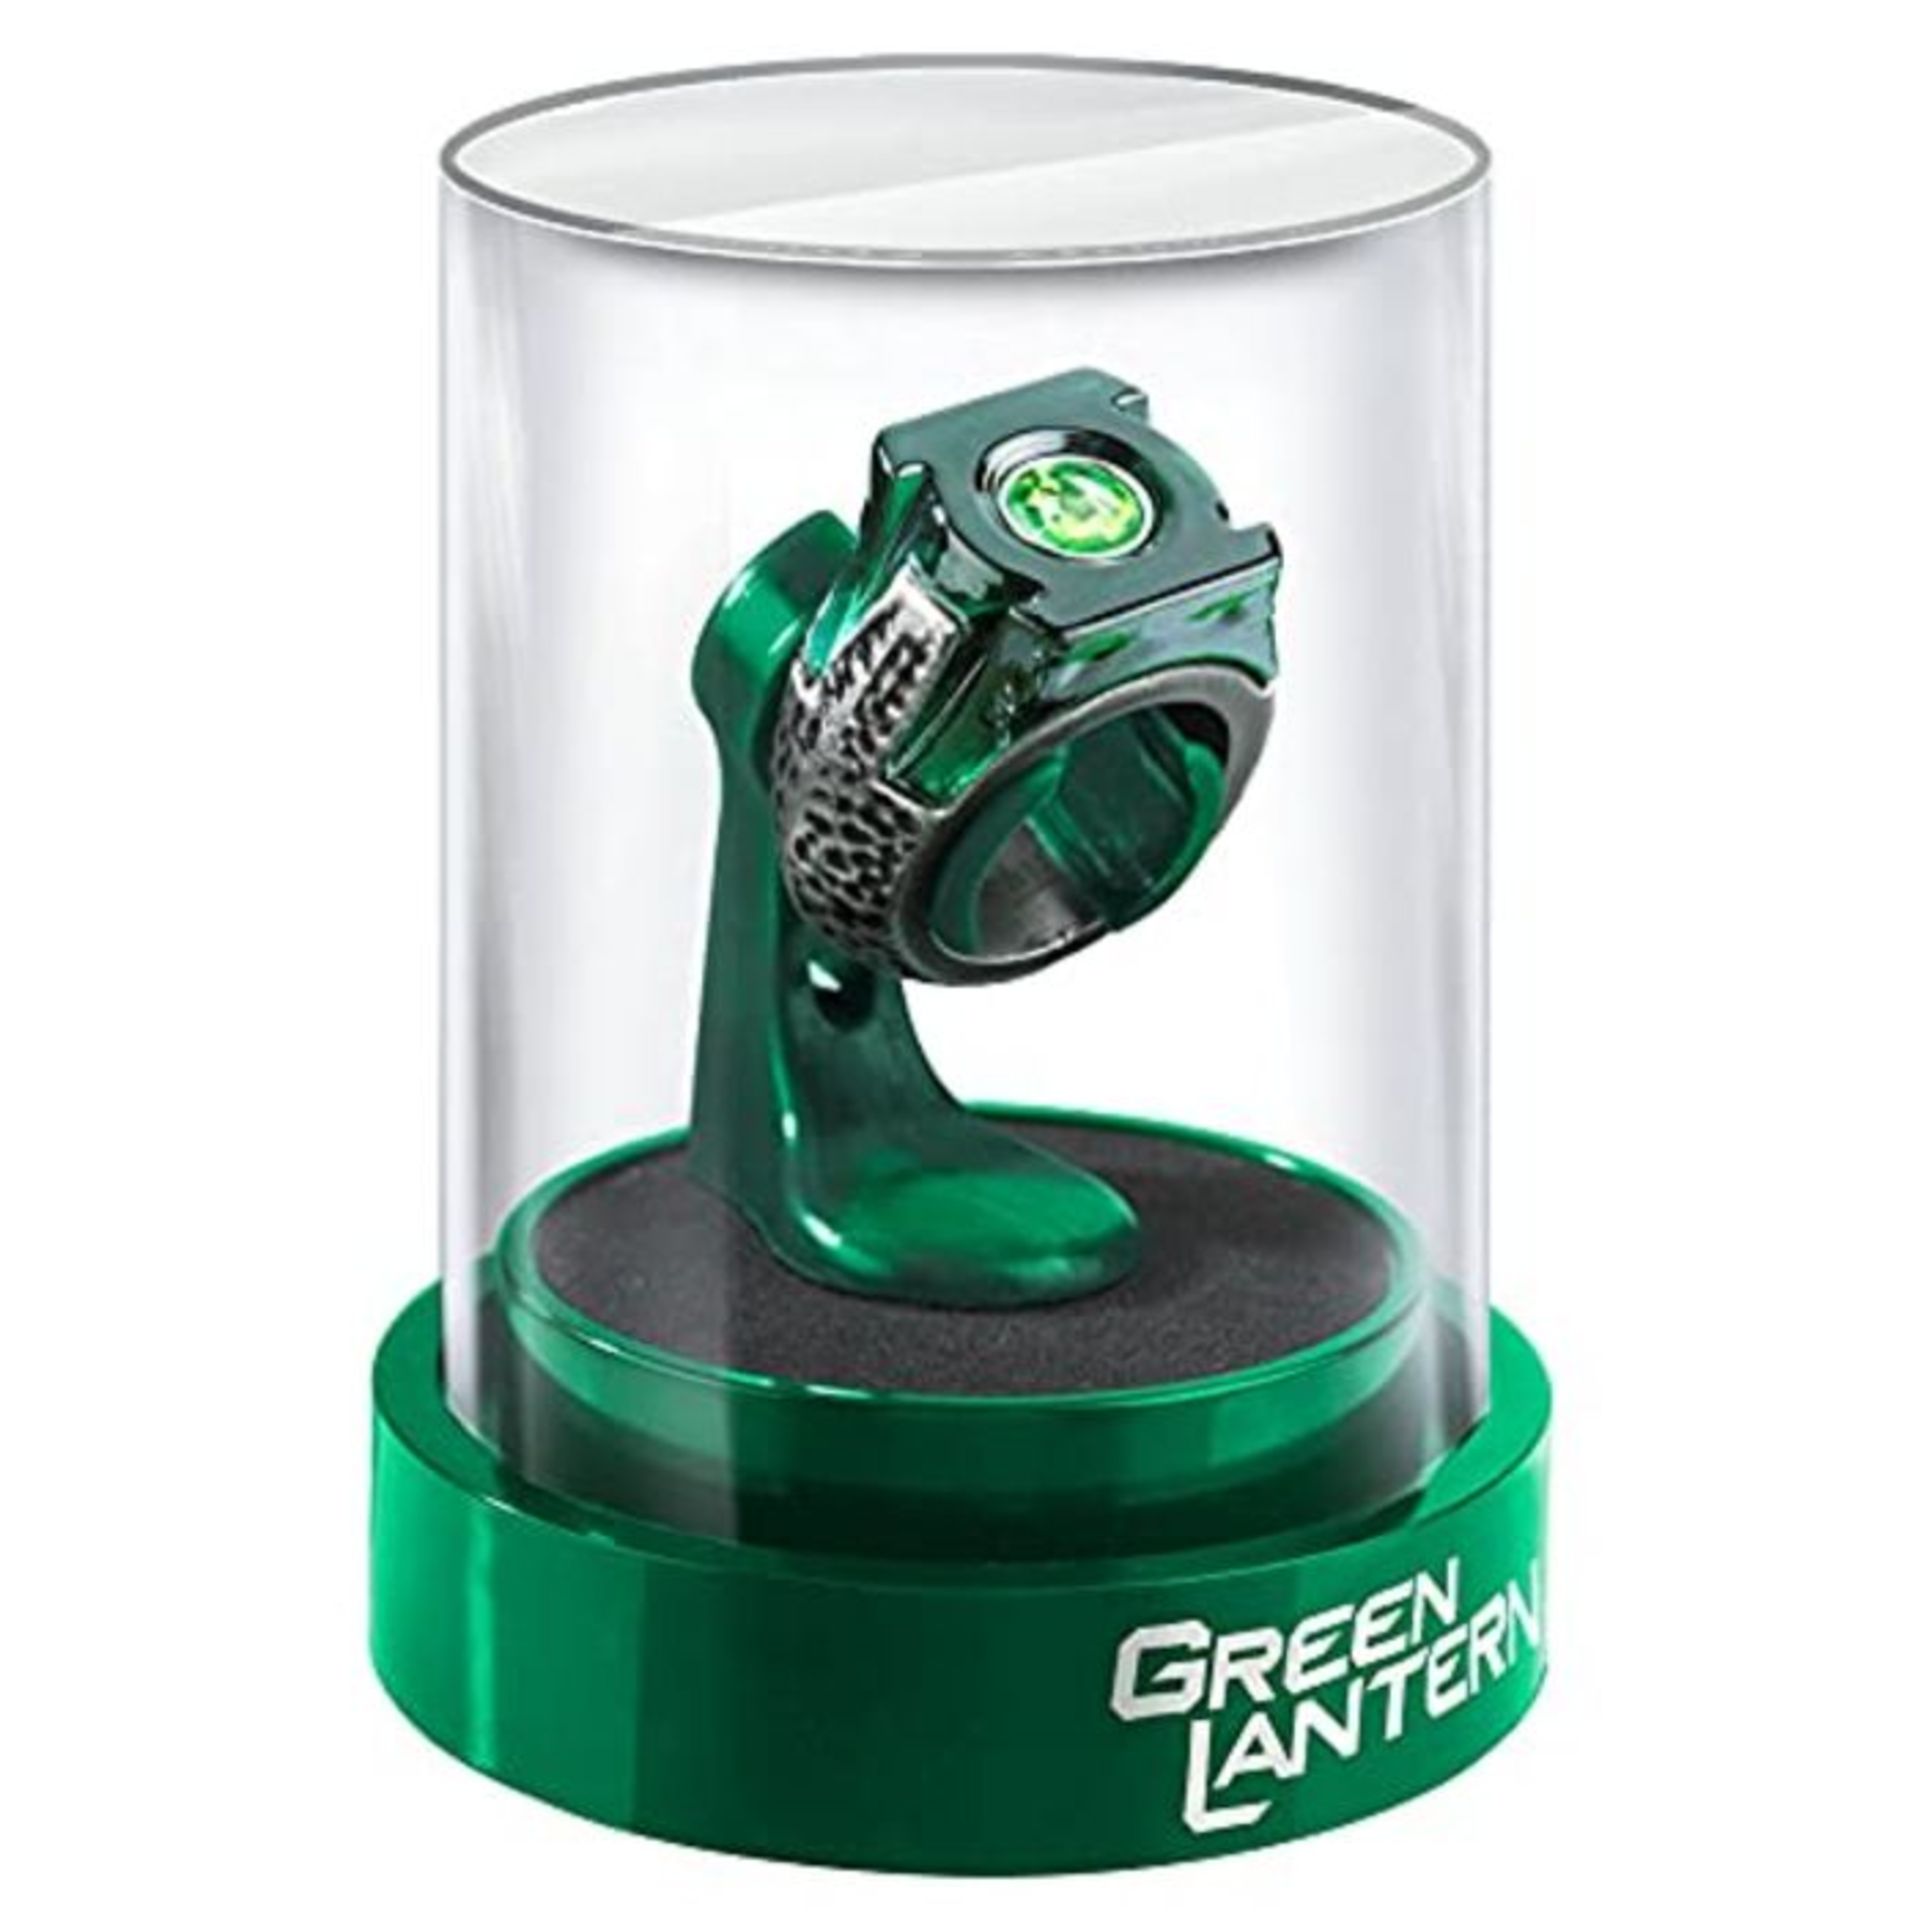 The Noble Collection Green Lantern Prop Ring & Display